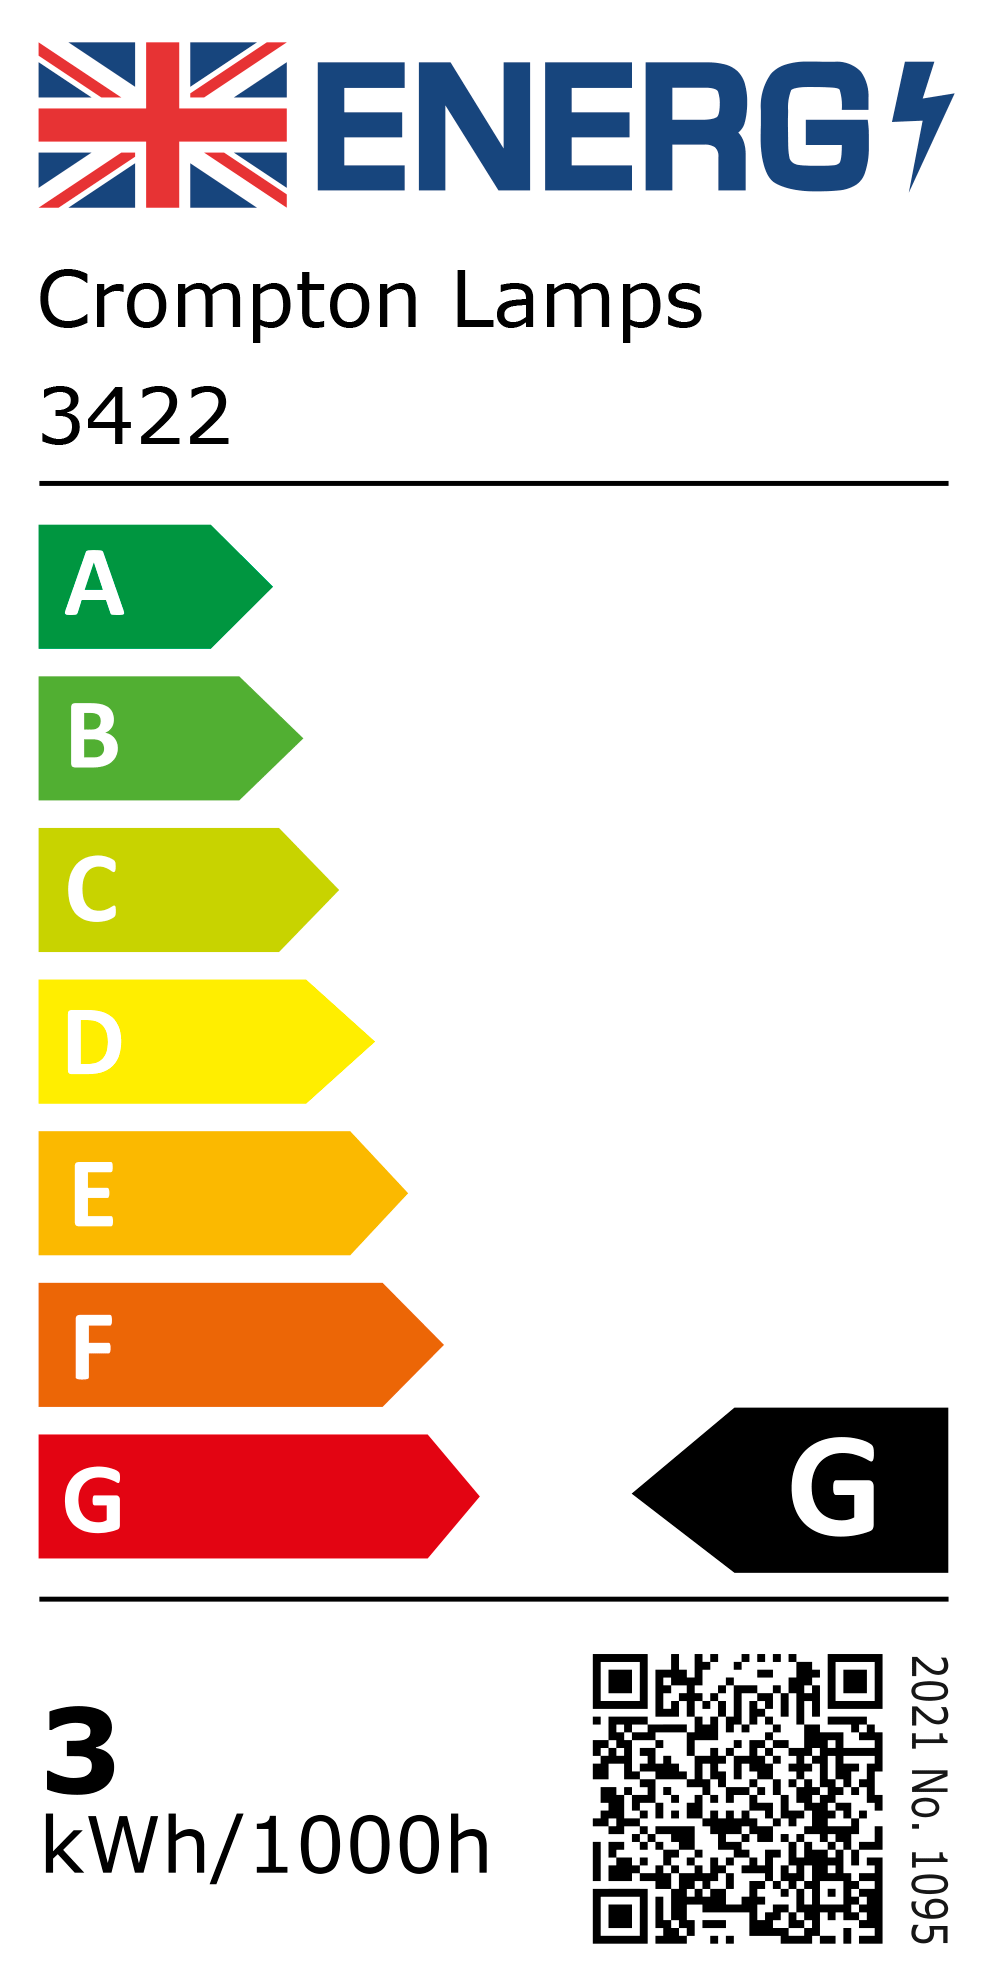 New 2021 Energy Rating Label: Stock Code 3422